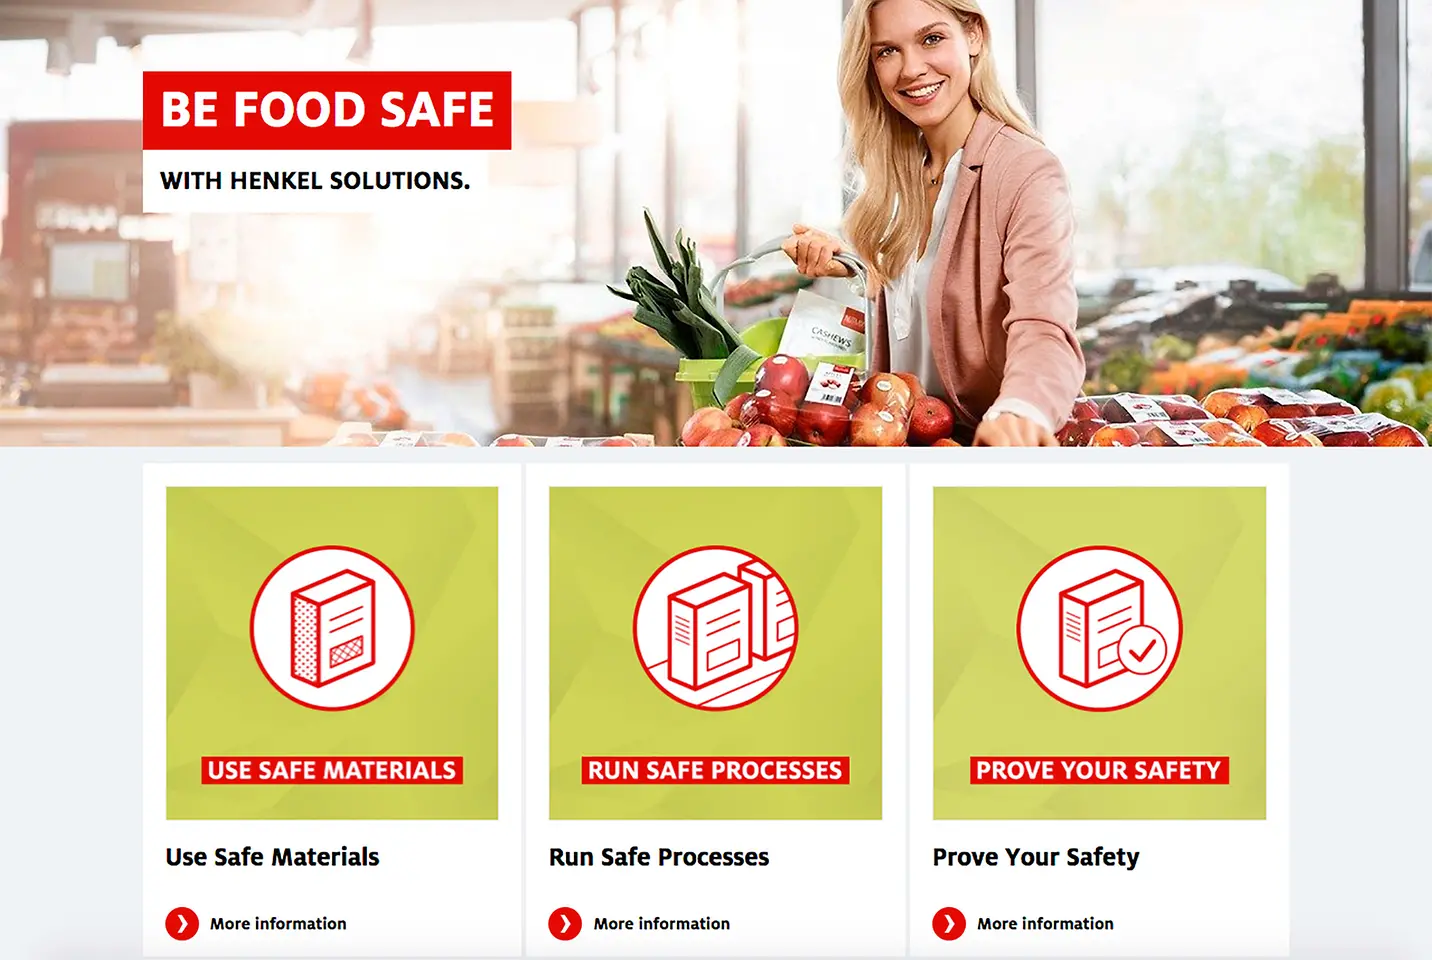 
Henkel provides insights into food safe packaging in its webinars available on its food safety portal: henkel.com/foodsafety